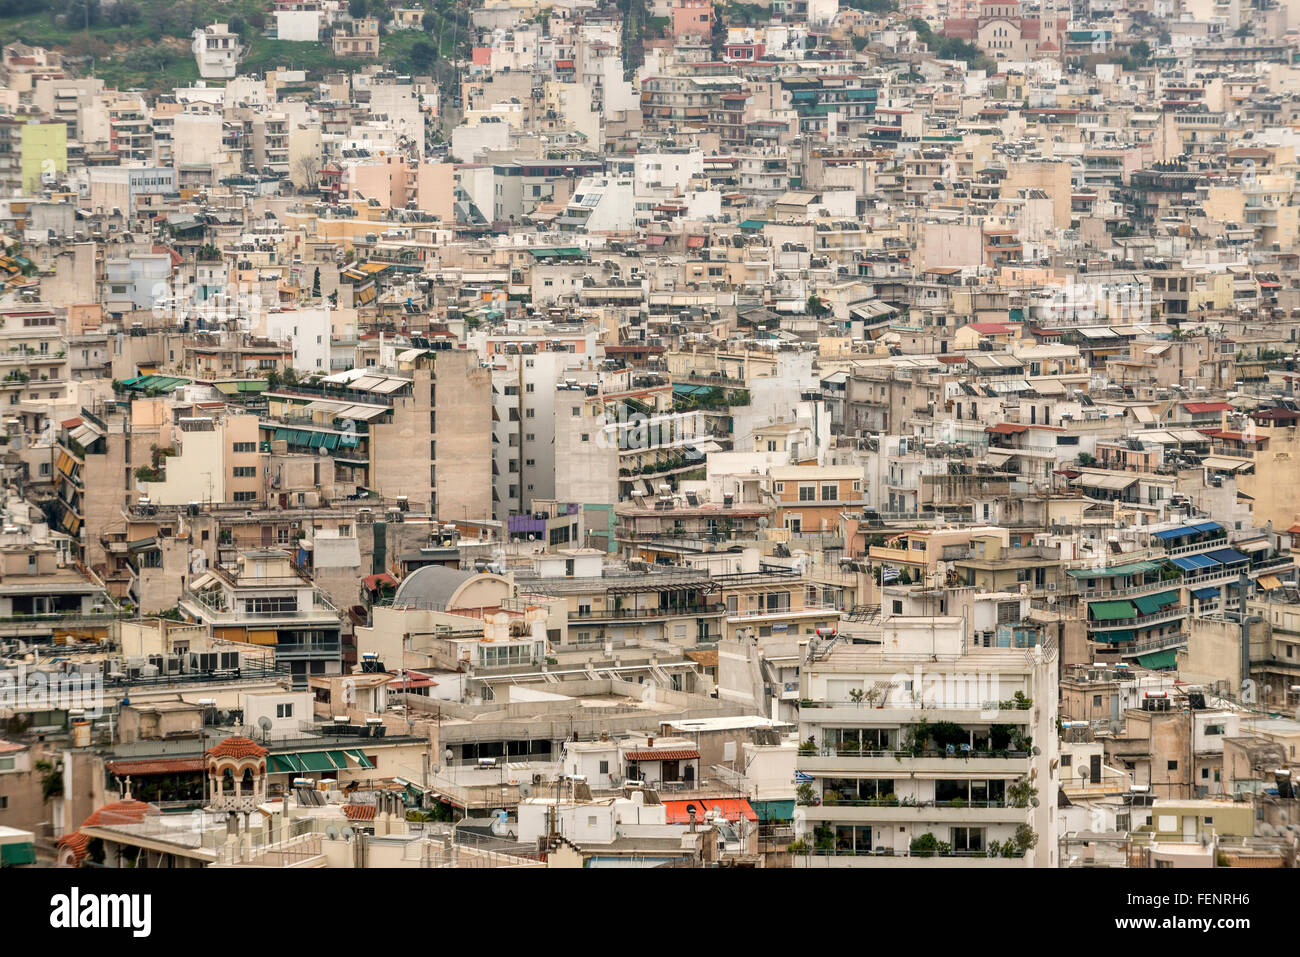 A view across the urban sprawl of Athens in Greece. Stock Photo